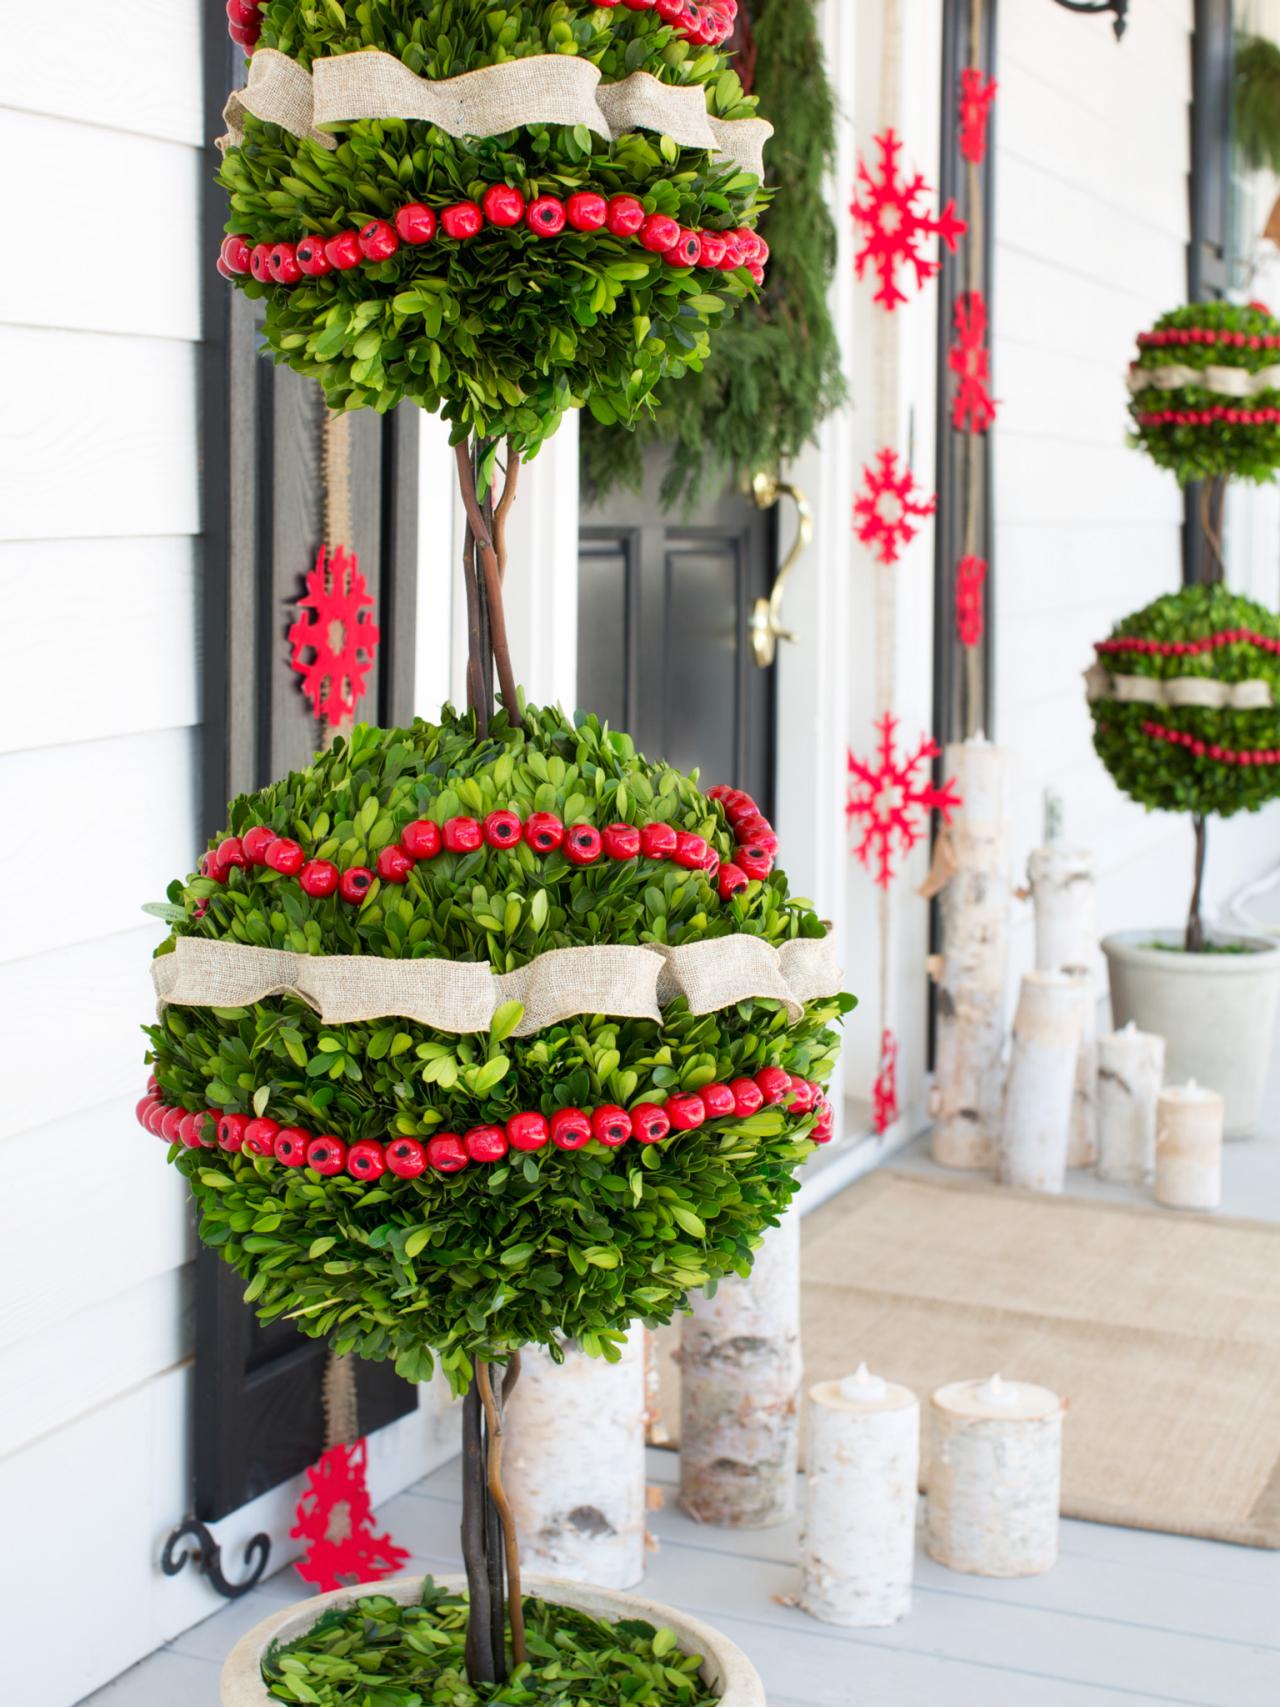 Amazing Holiday Porch Ideas| Holiday Porch Decor, Holiday Porch Decor Ideas, Holiday Porch Decor Christmas Home, Christmas Porch Decorating Ideas, Christmas Porch Ideas #ChristmasPorchDecoratingIDeas #ChristmasPorchIdeas #HolidayPorch #HolidayPorchIdeas